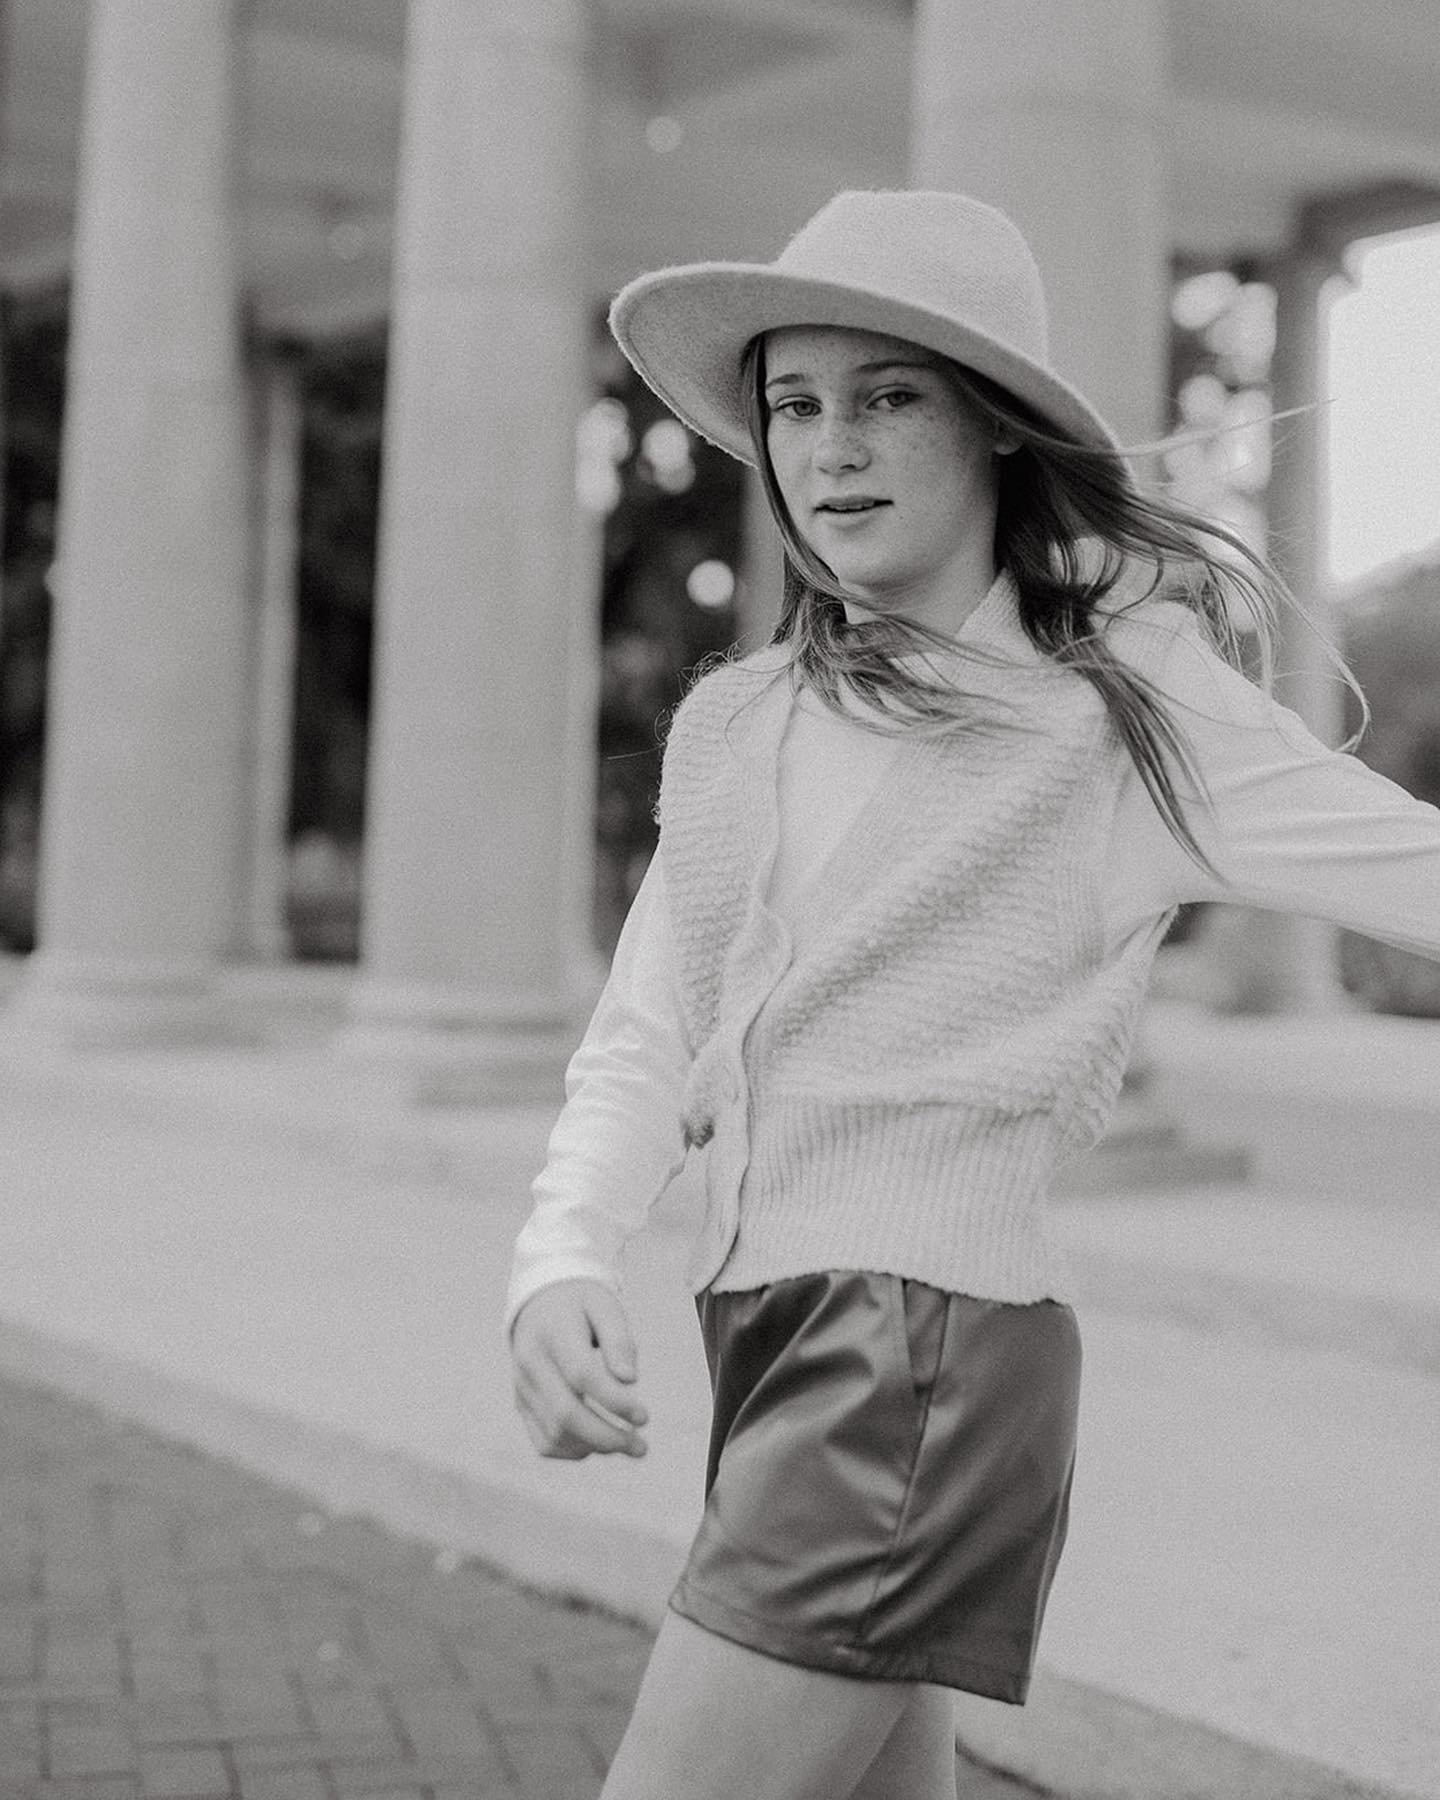 Sweet Caroline 🤩🤠 by @lettyweeksphotography 🫶🏻

Contact info@jeamodels.com to work with our kids division. #jeakids #jeamodelmanagement 

www.jeamodels.com